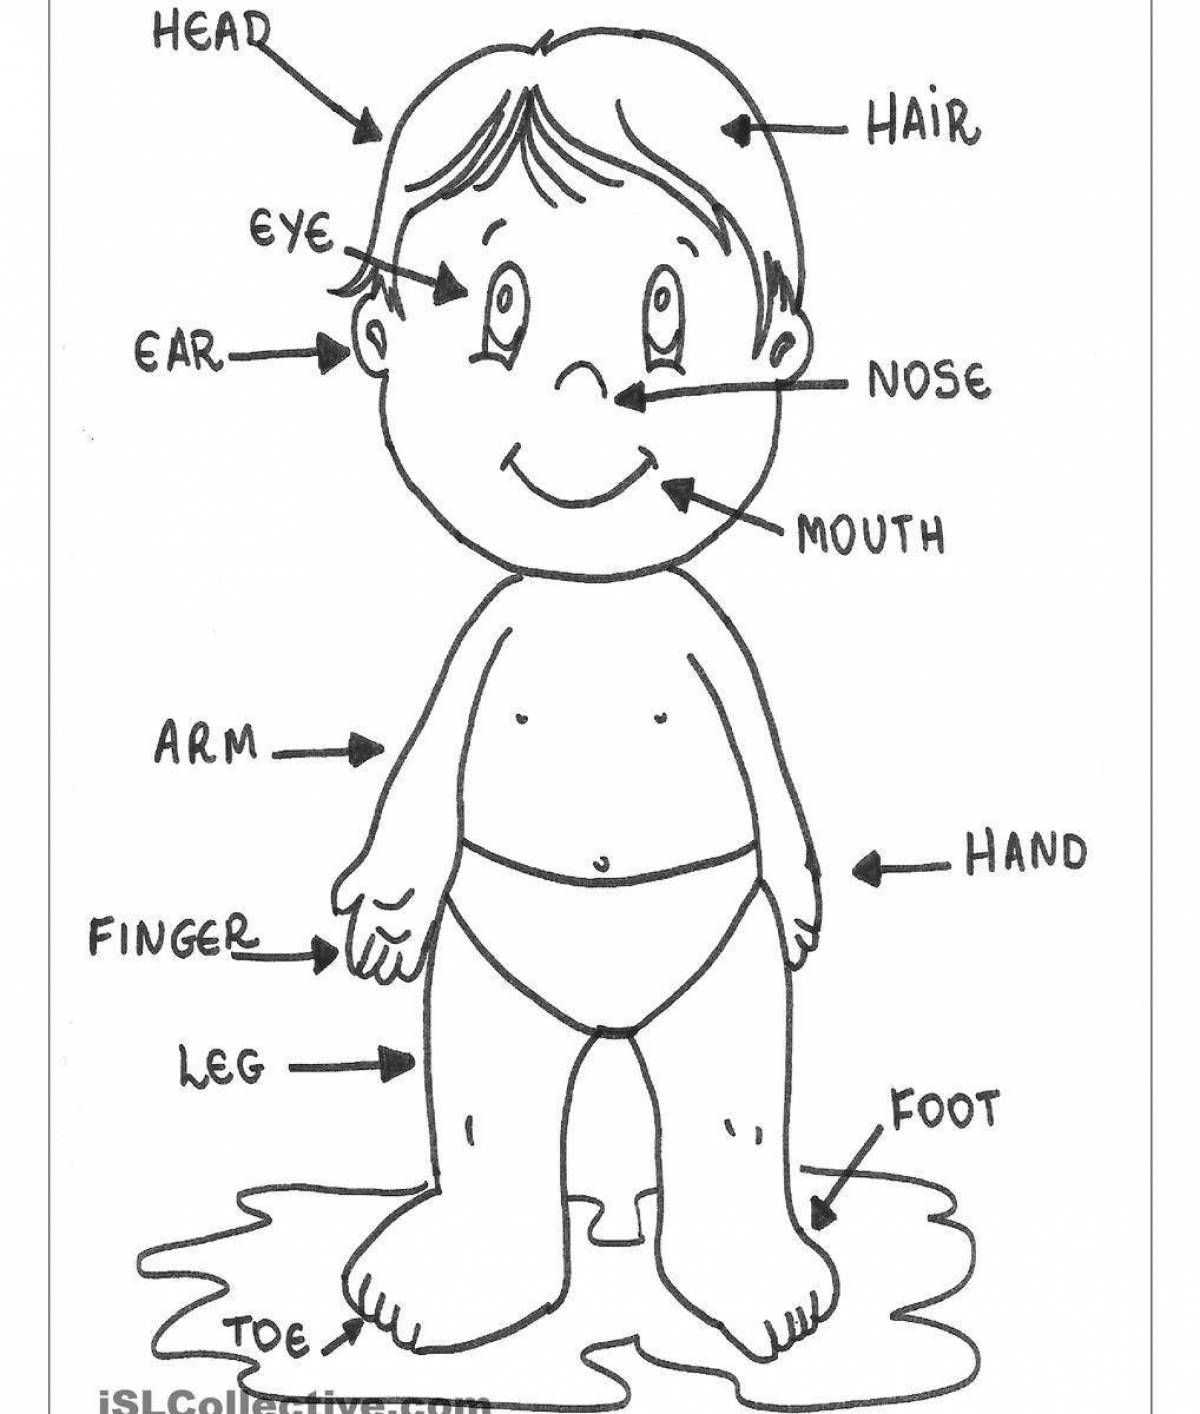 Coloring page of colorful body parts